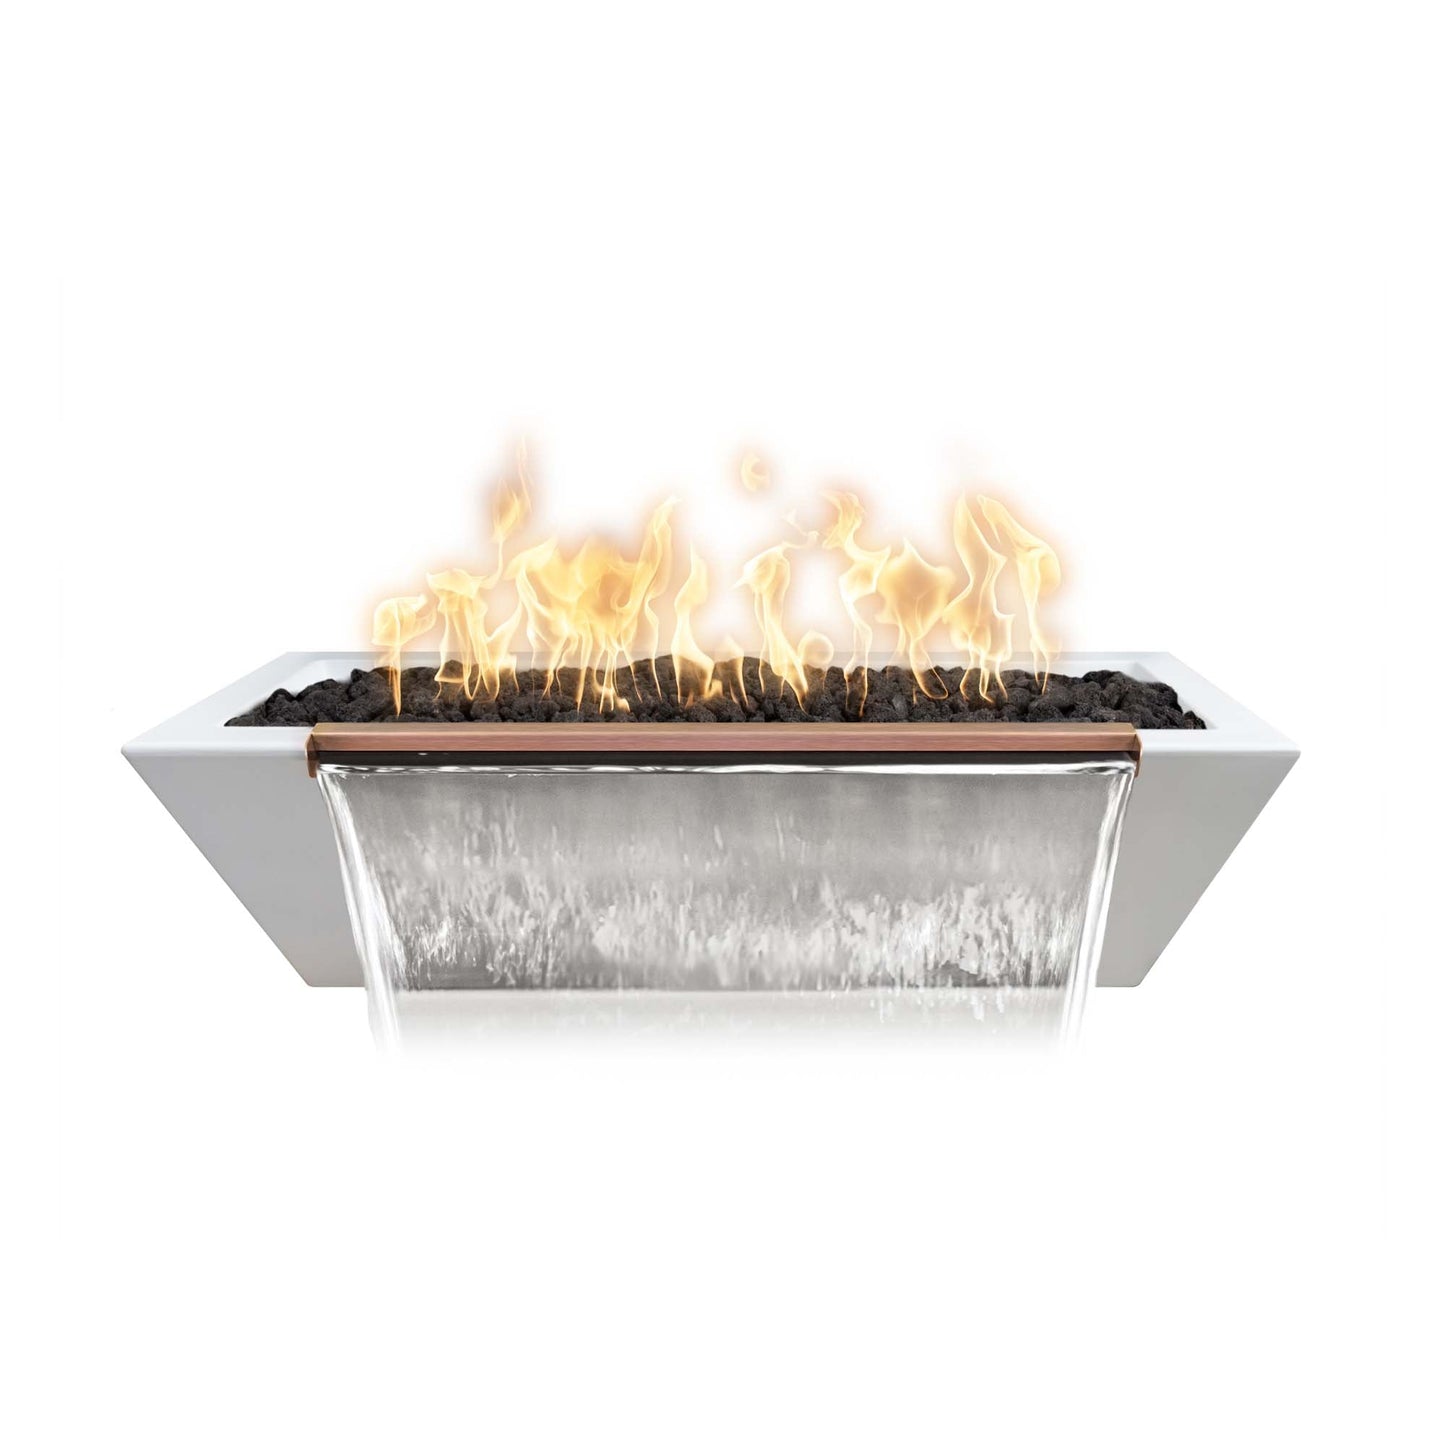 The Outdoor Plus Linear Maya 72" Metallic Silver GFRC Concrete Natural Gas Fire & Water Bowl with Match Lit with Flame Sense Ignition